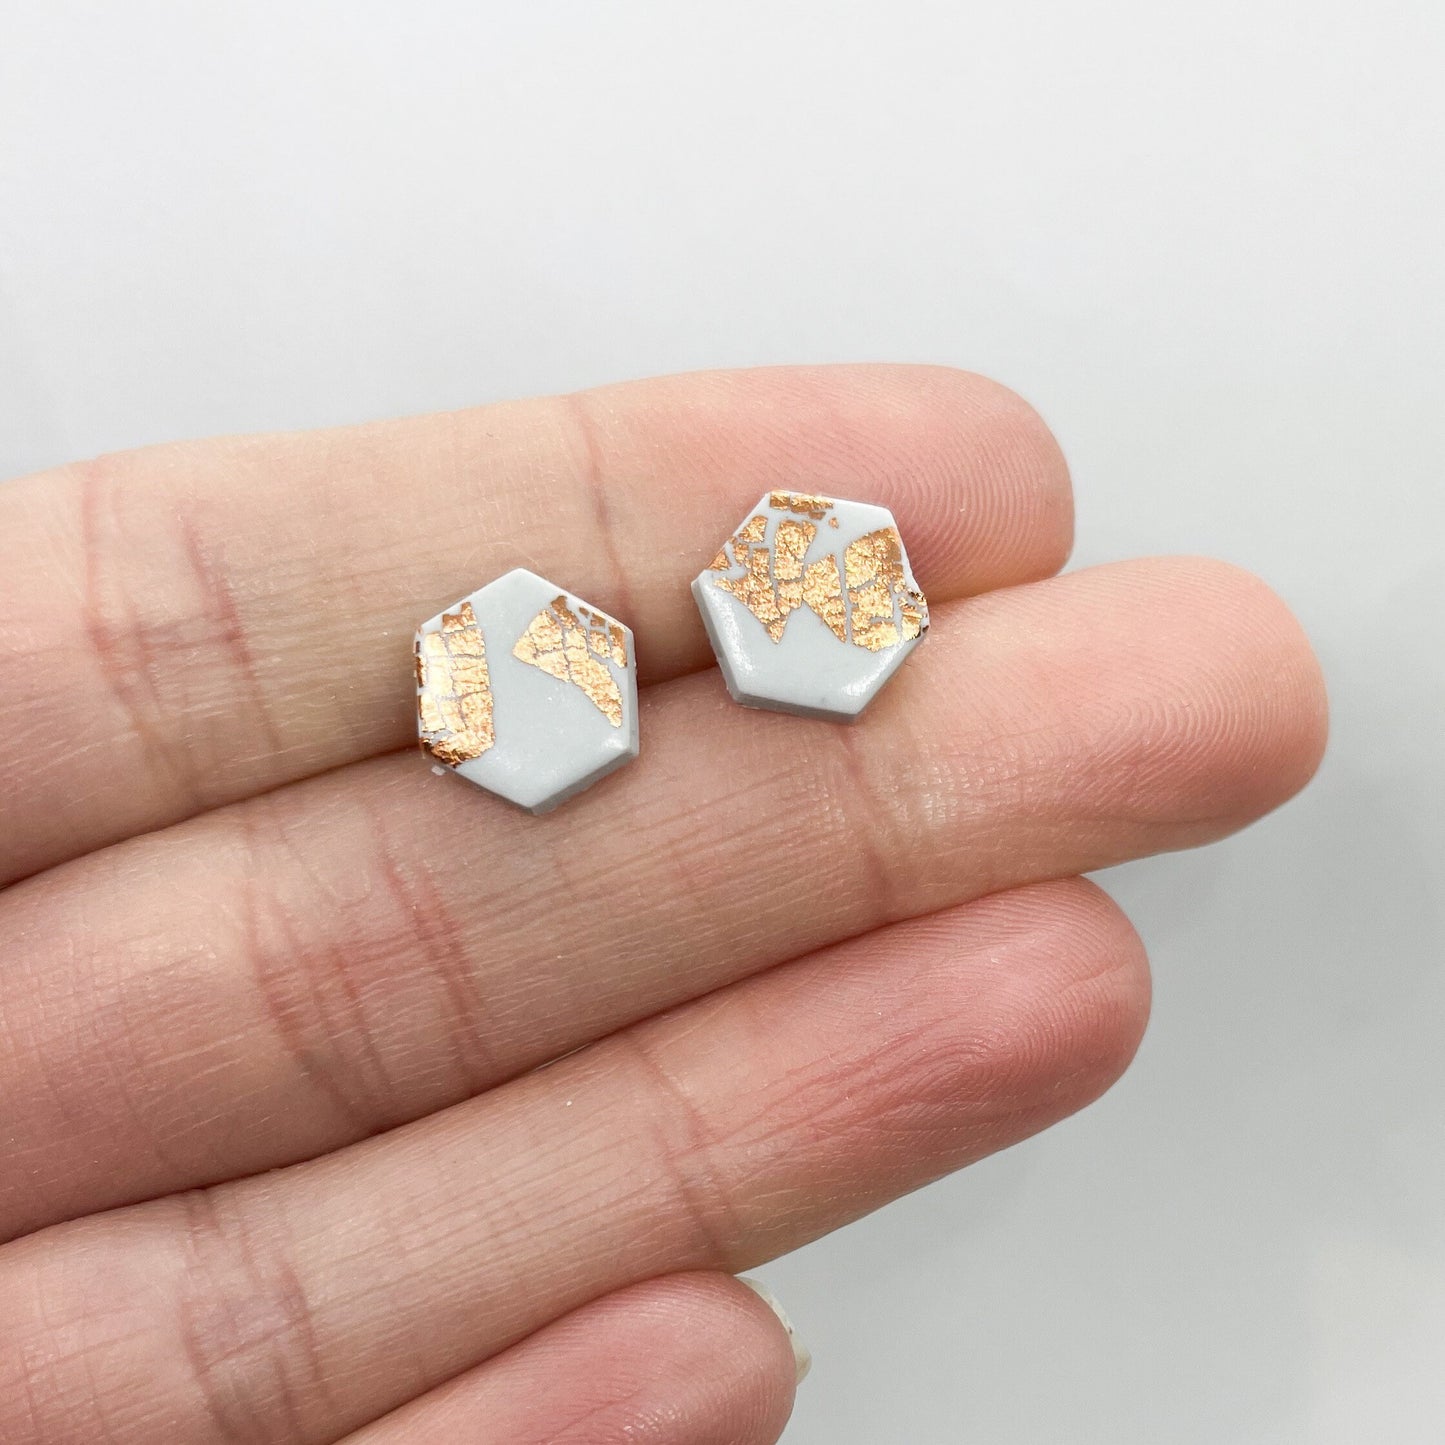 grey and rose gold leaf polymer clay stud earrings, handmade earrings, Christmas gift for her, best friend gift, girlfriend gift,